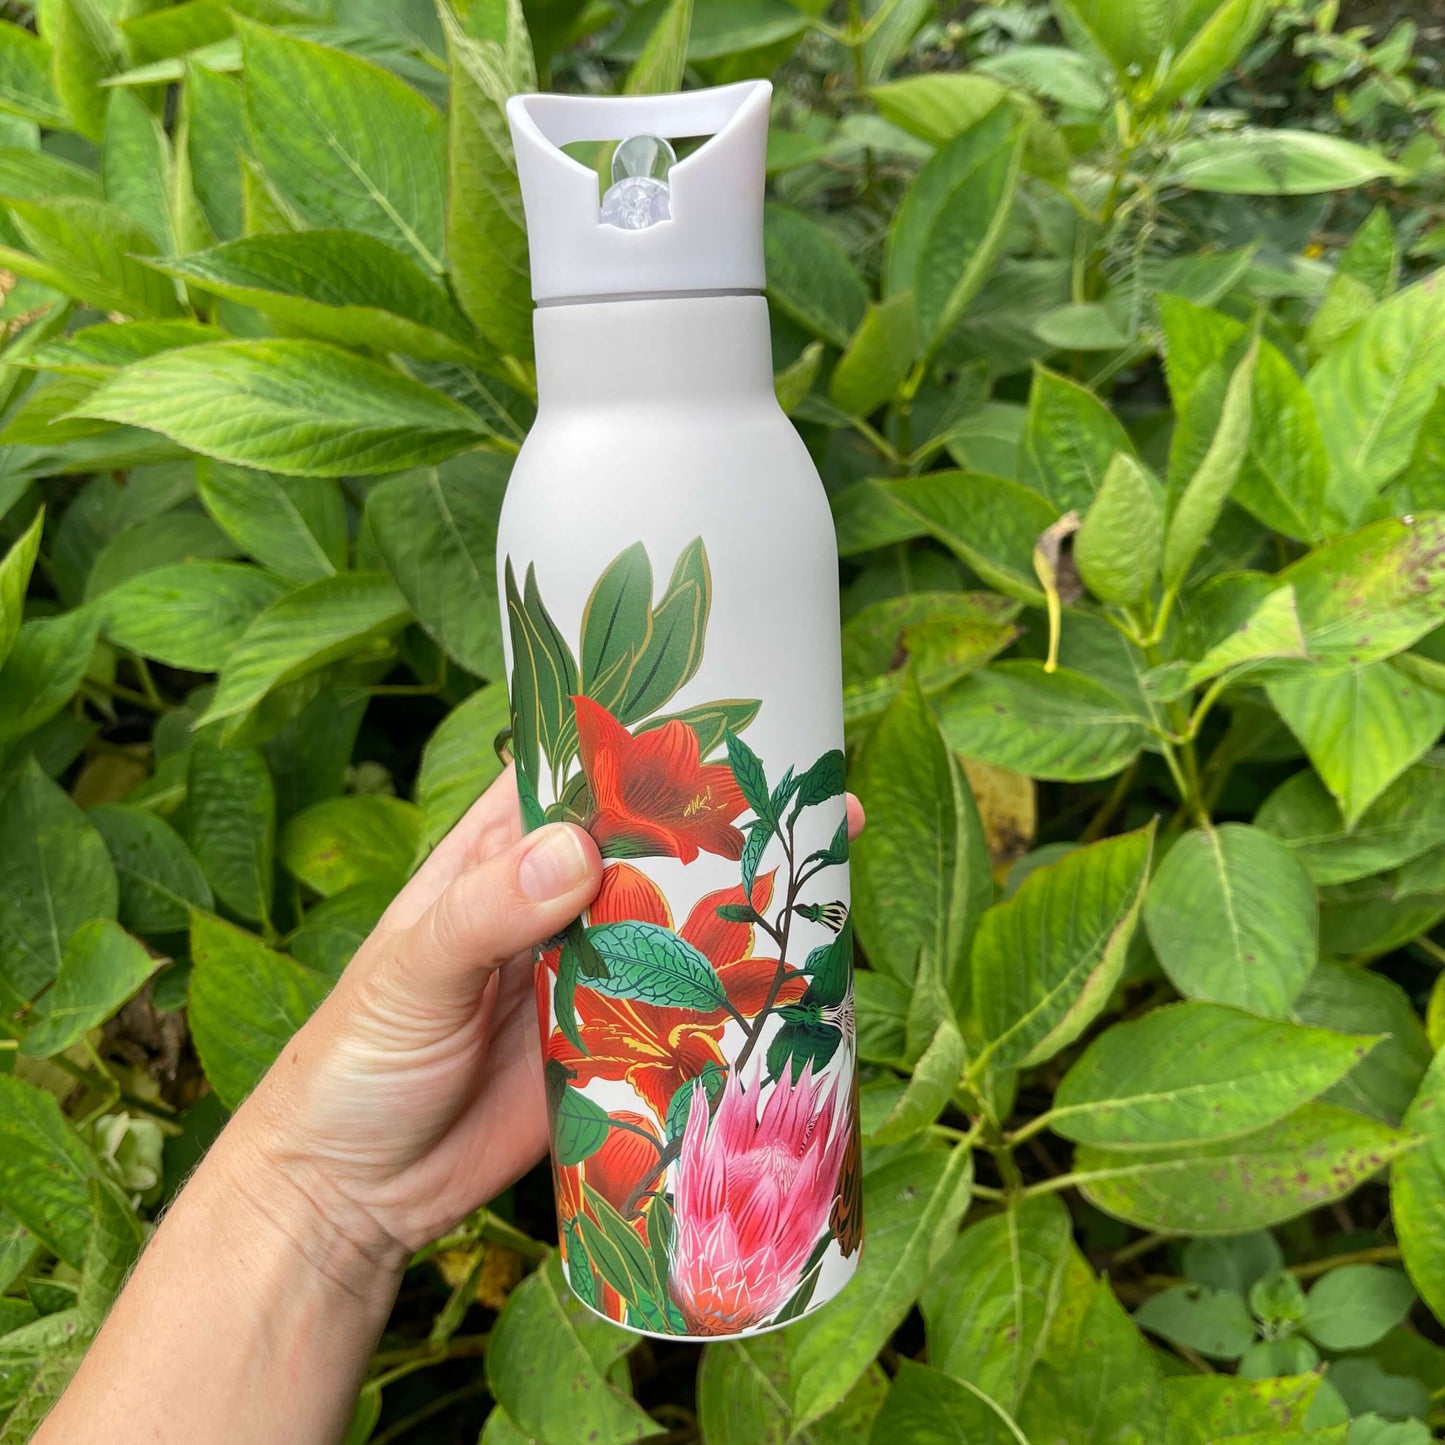 Womens hand holding a white drink bottle featuring artwork of a Kaka bird and flowers. Bottle has a white plastic sipper top..